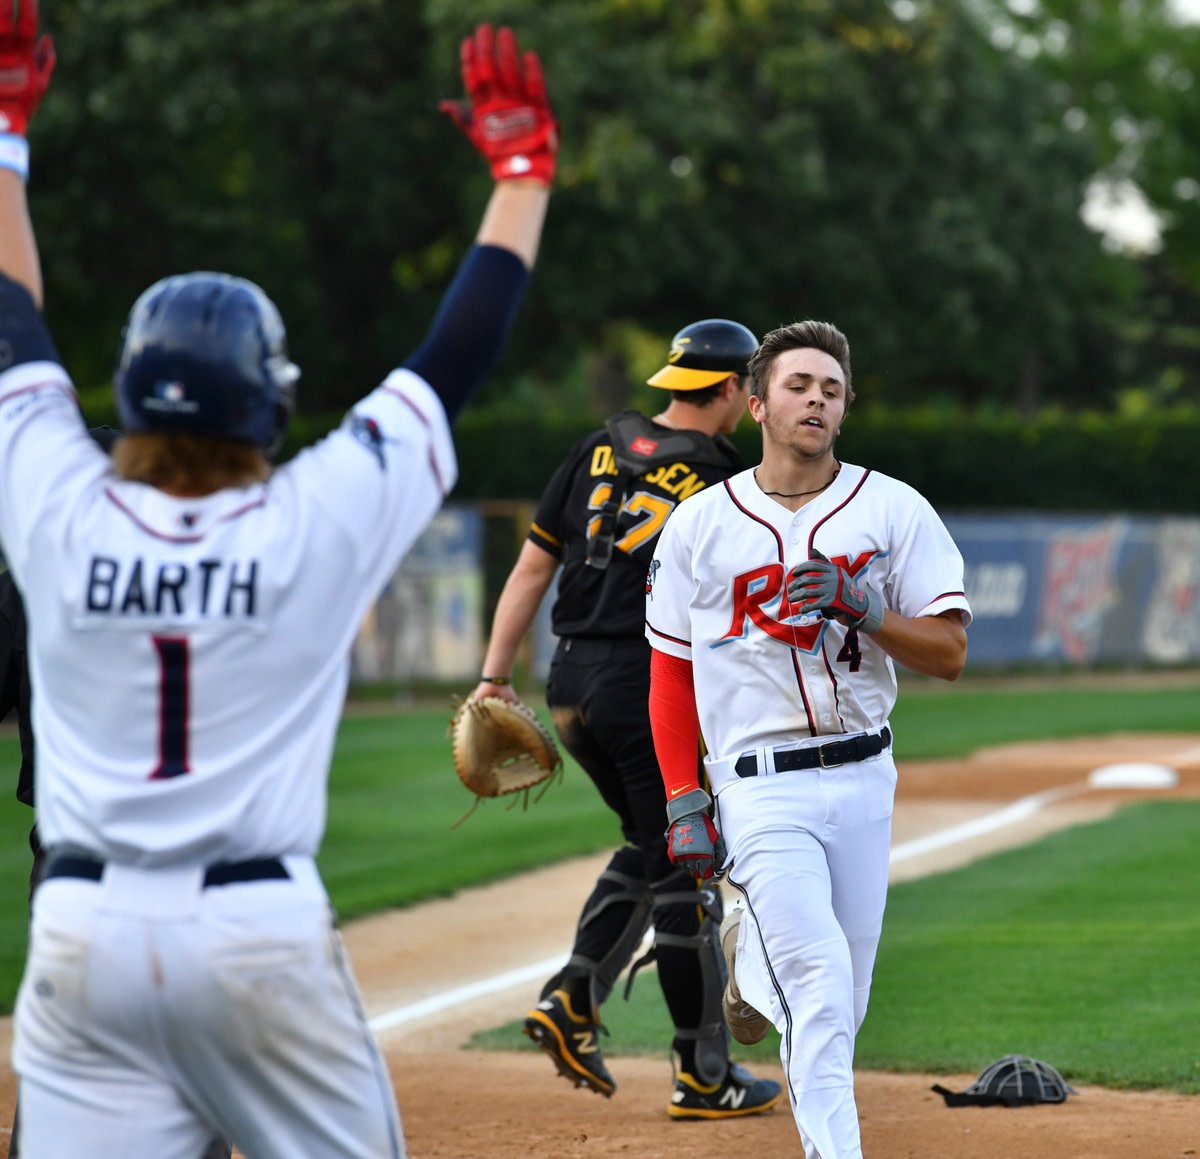 Andrew Pintar scores on an inside-the-park home run during the final game of the season Thursday, Aug. 20, 2020, at Joe Faber Field in St. Cloud. Rox 2